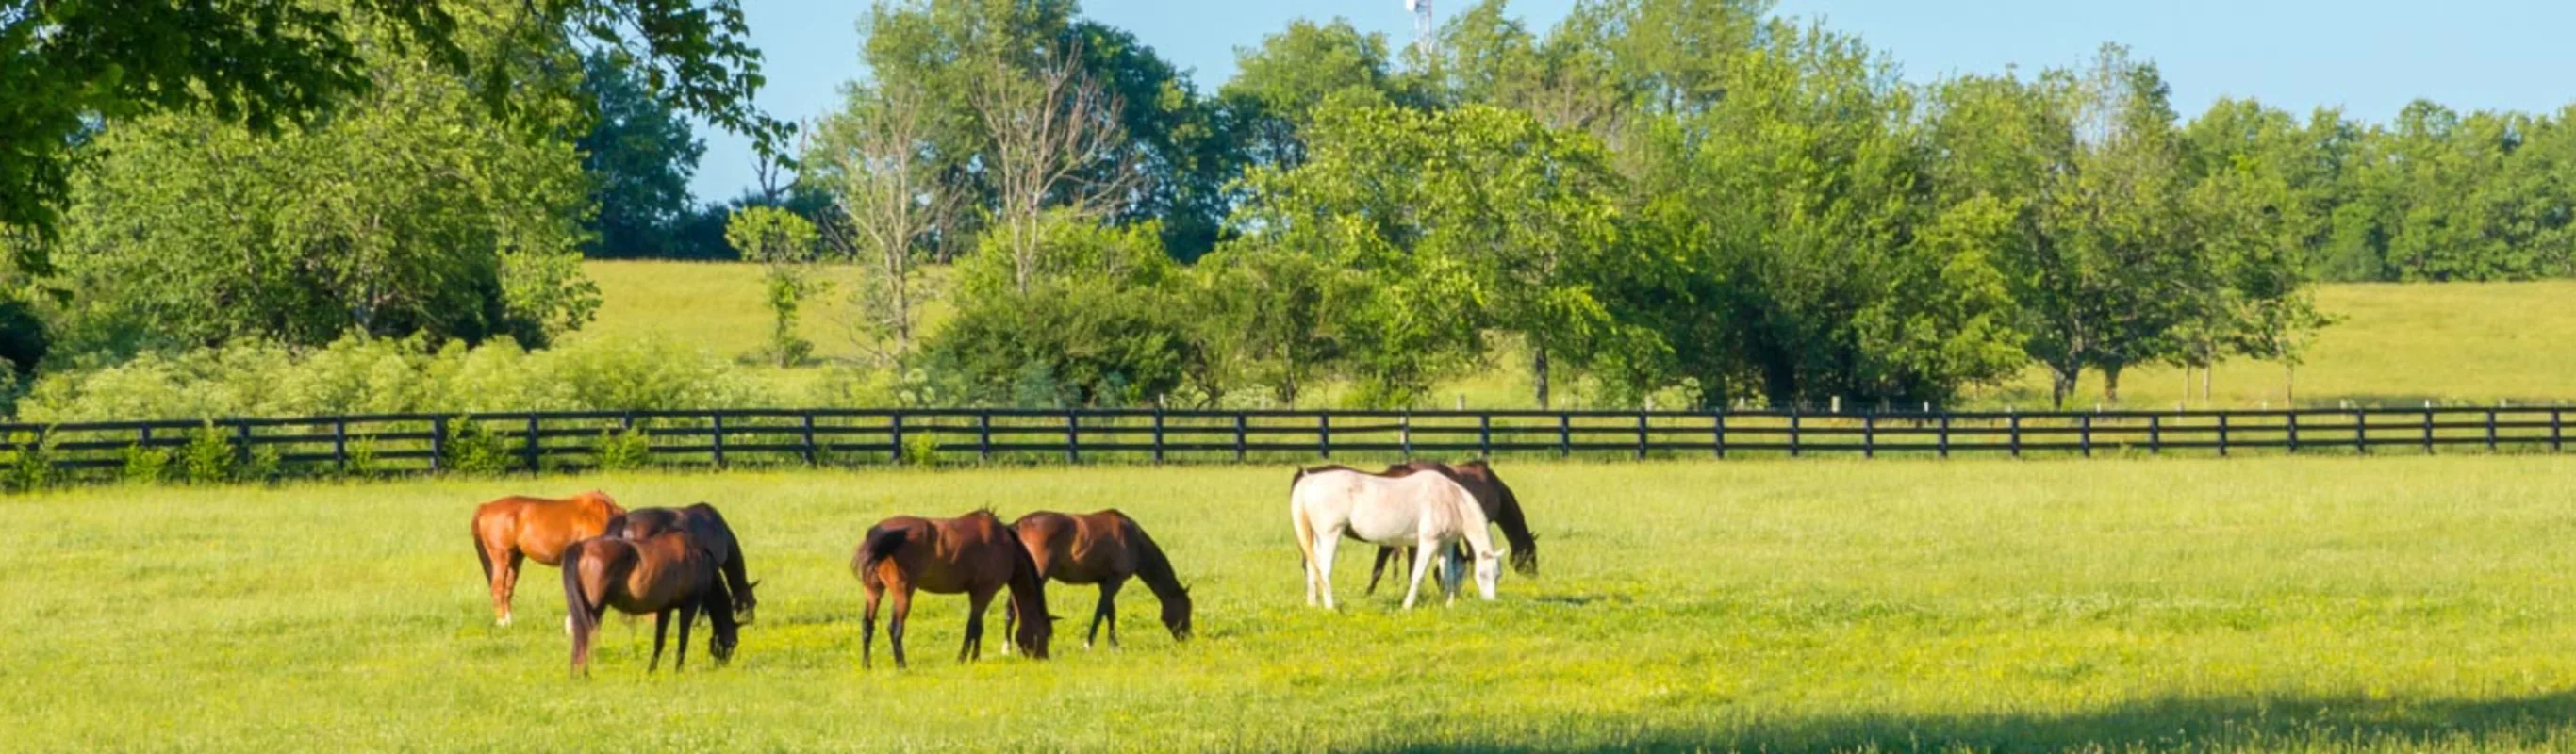 Several horses grazing together in a grassy pen.